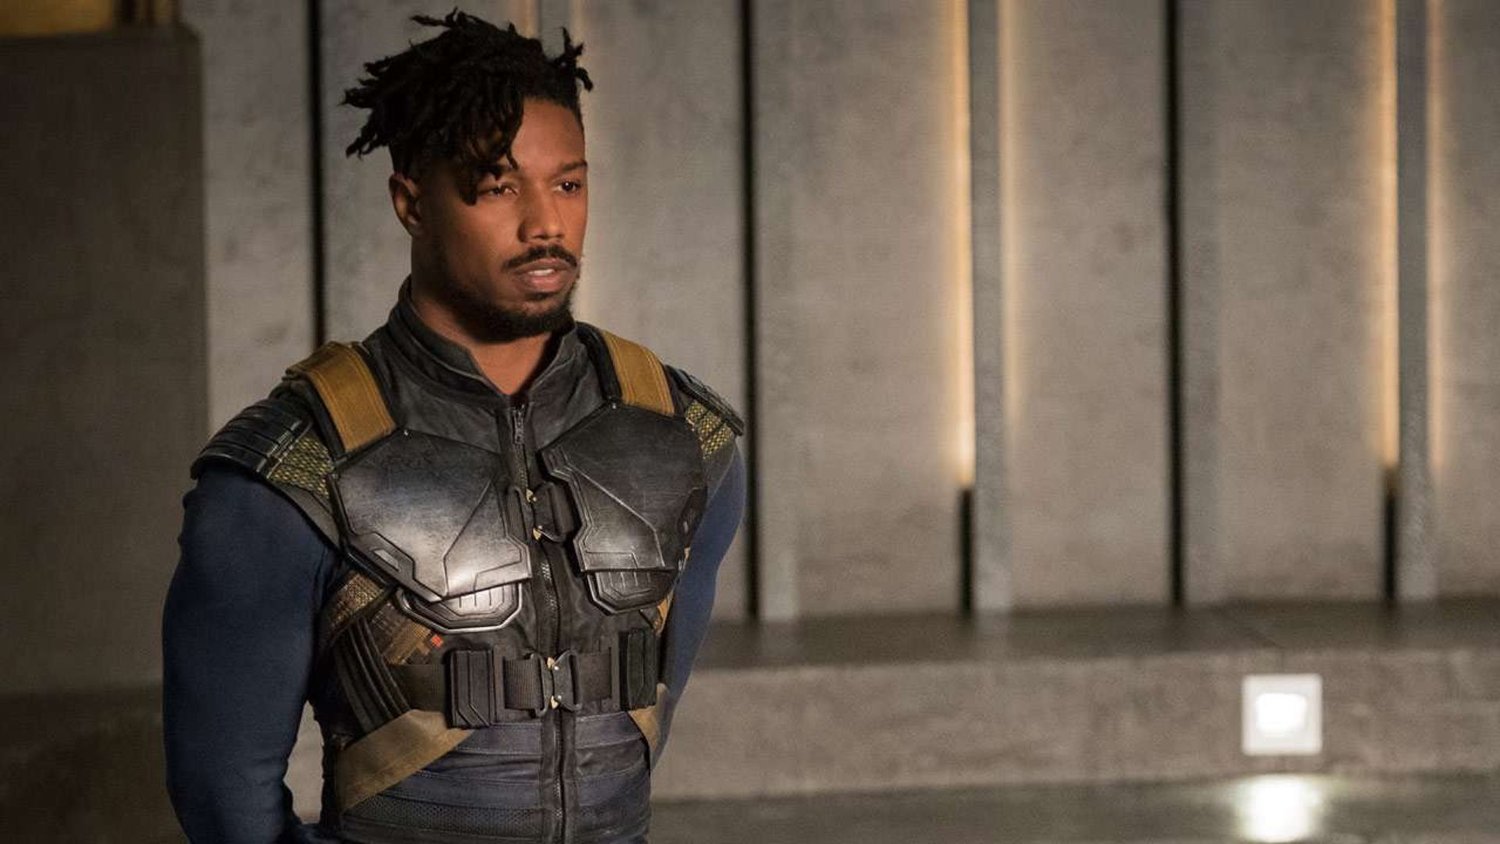 behind the scenes, When Michael B. Jordan instantly improvised Killmonger’s “Hey, Auntie” line from Black Panther.